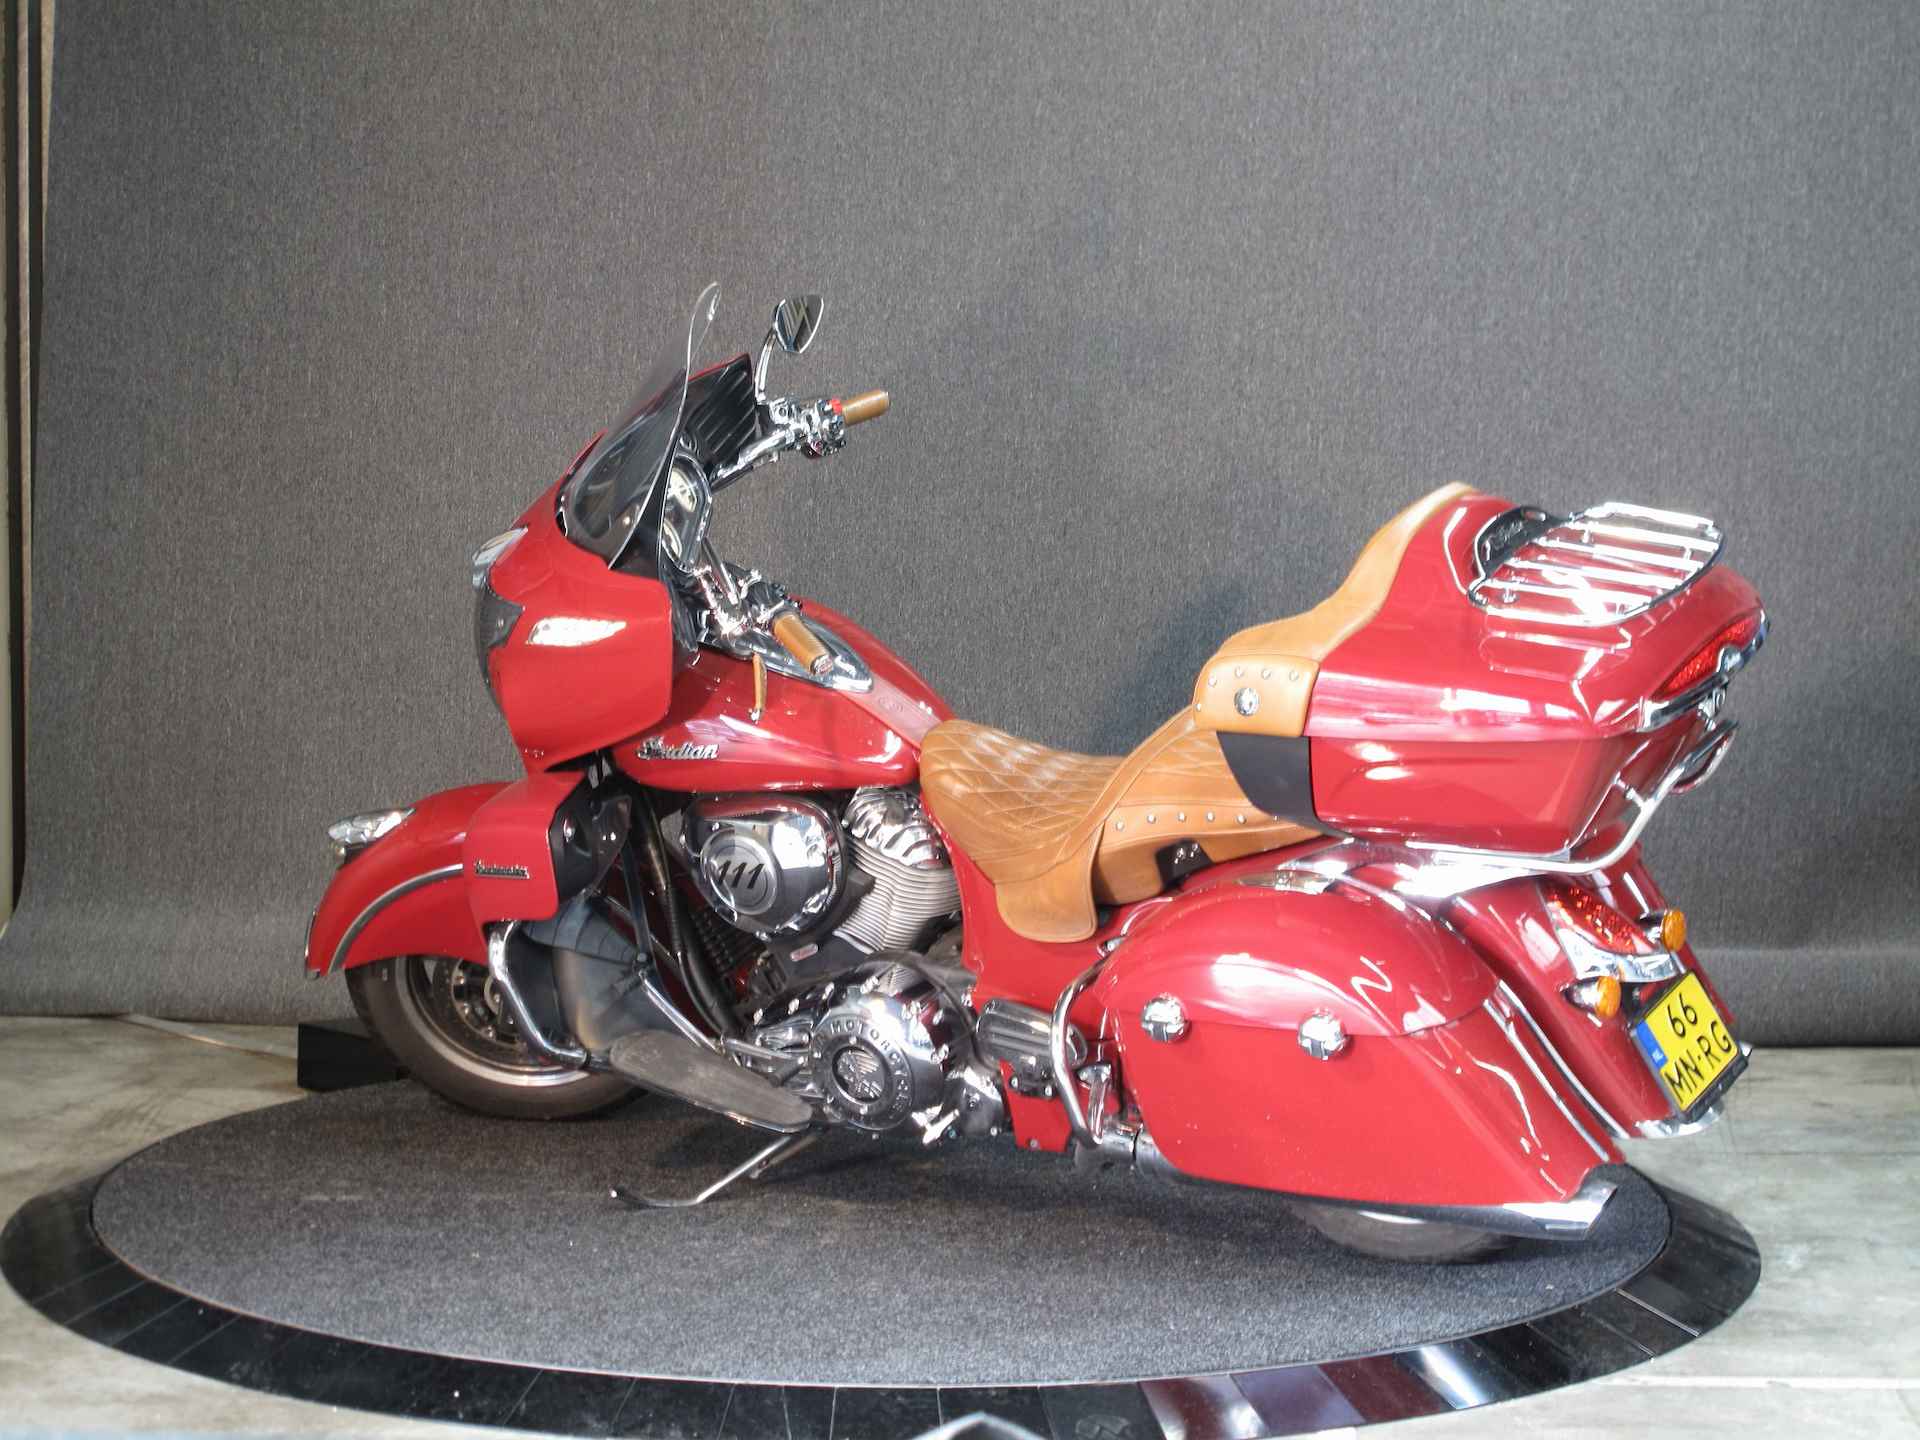 Indian Roadmaster The official Indian Motorcycle Dealer - 11/13